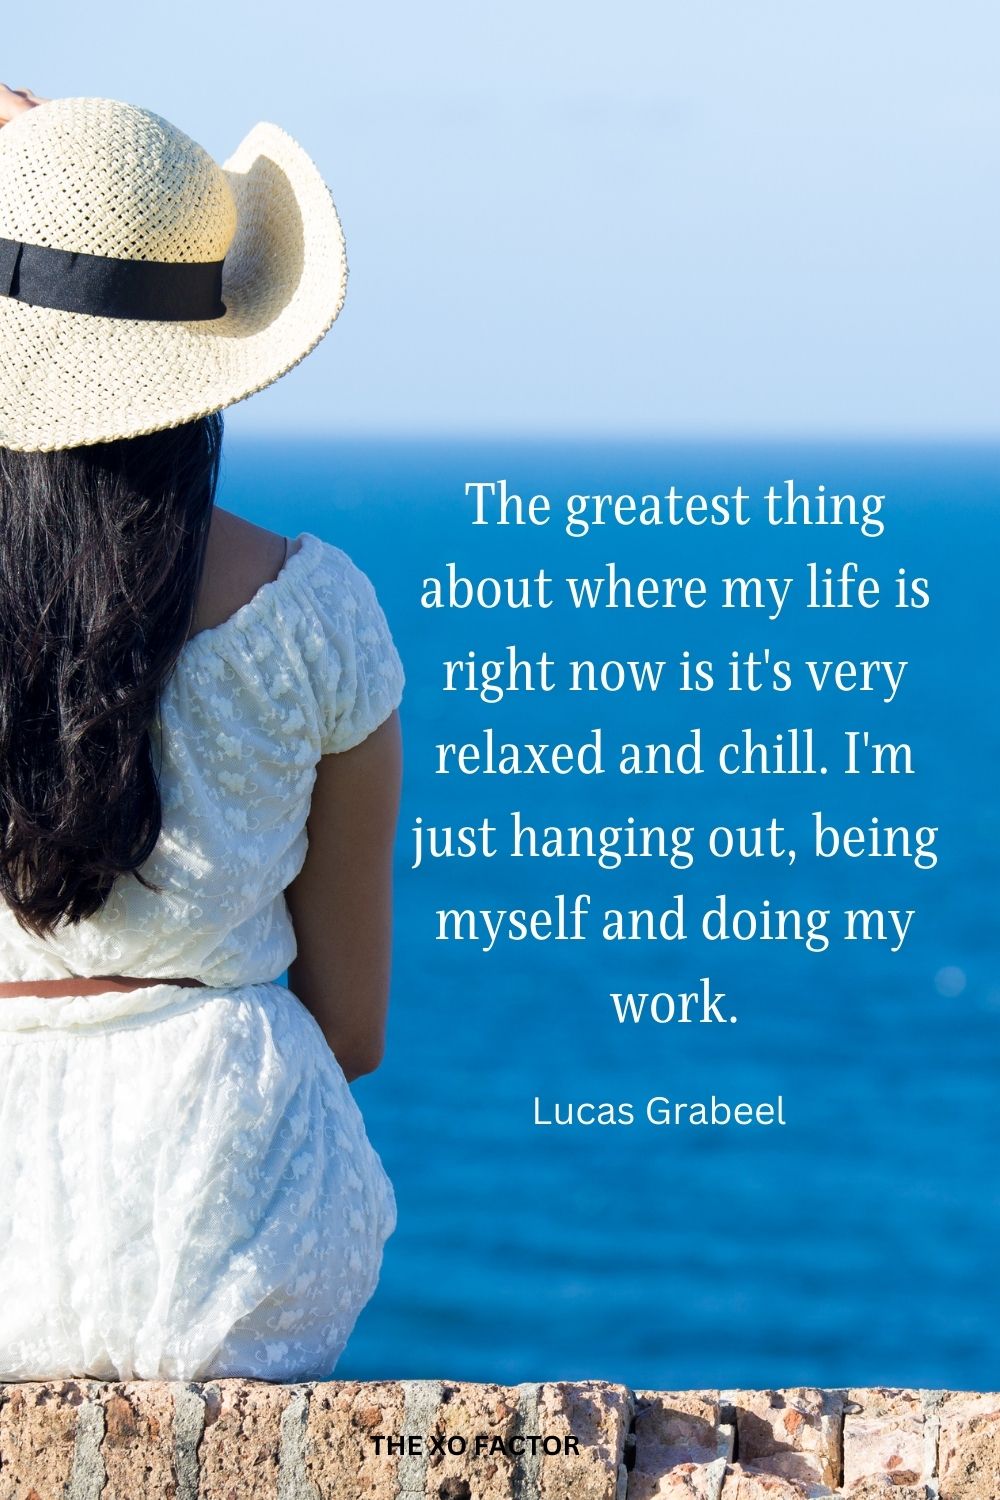 The greatest thing about where my life is right now is it's very relaxed and chill. I'm just hanging out, being myself and doing my work.
Lucas Grabeel